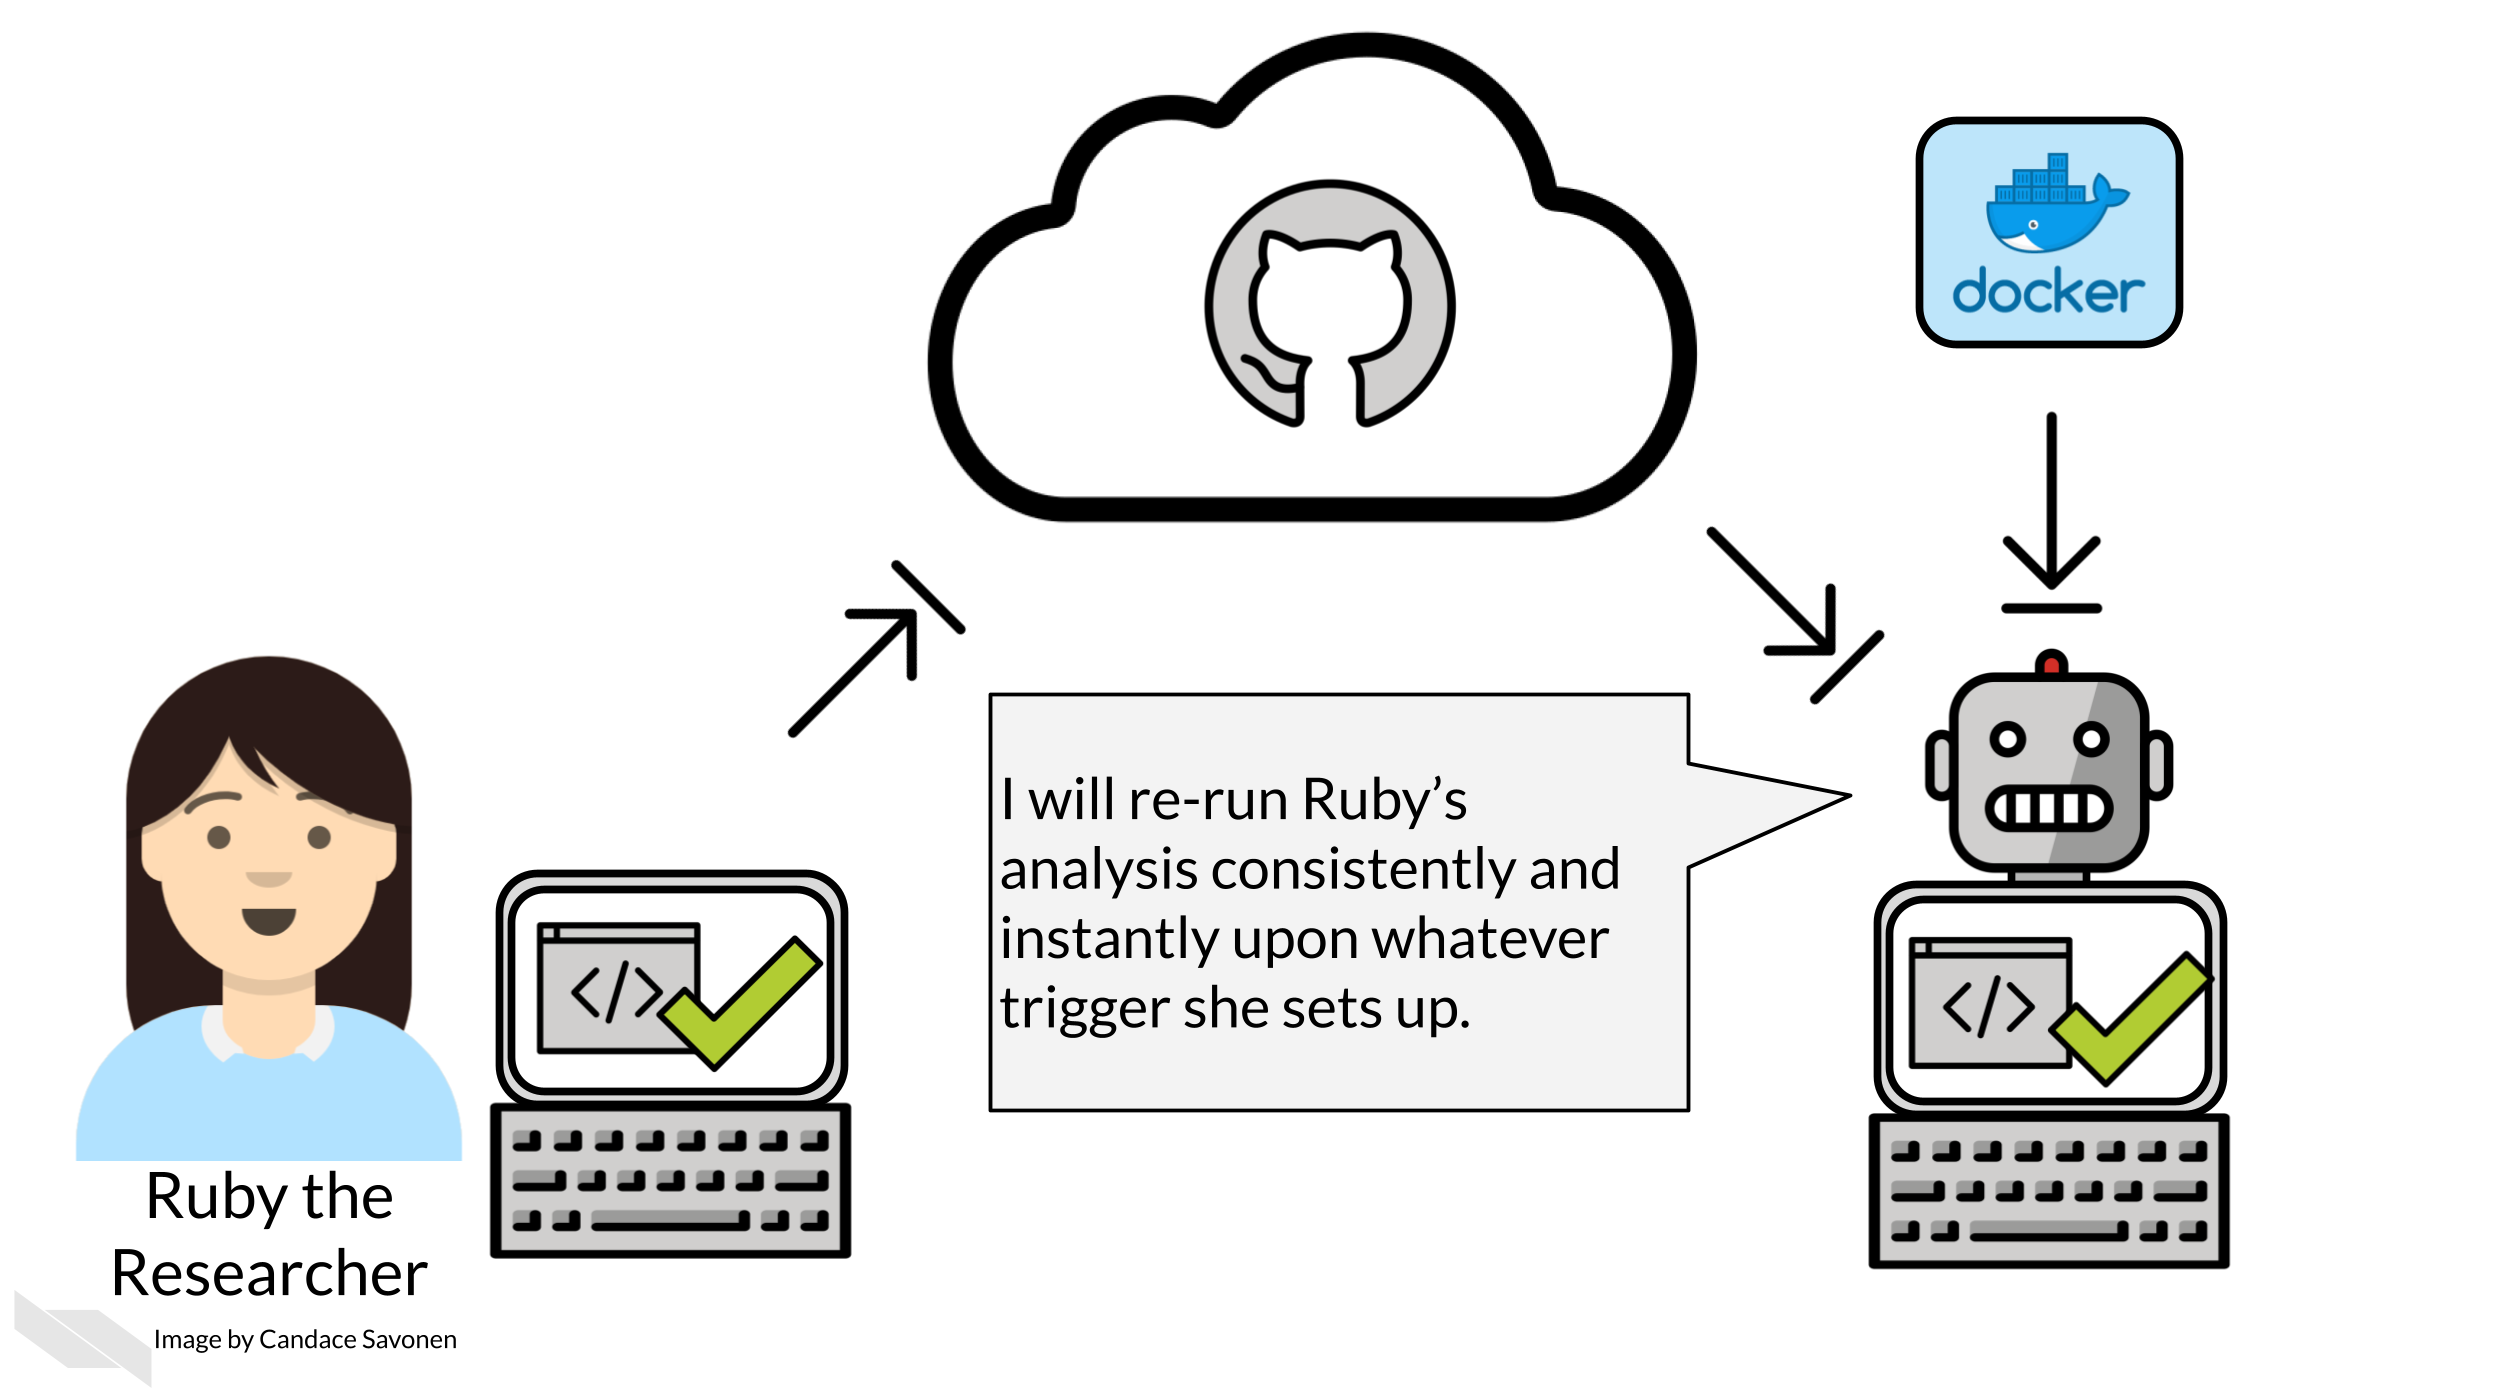 Ruby wants to know if her analysis is reproducibly so she sets up an automation tool to re-run her analysis whenever she pushes changes to her analysis. This robot has a computer for a body and says 'I will re-run Ruby’s analysis consistently and instantly upon whatever trigger she sets up.''